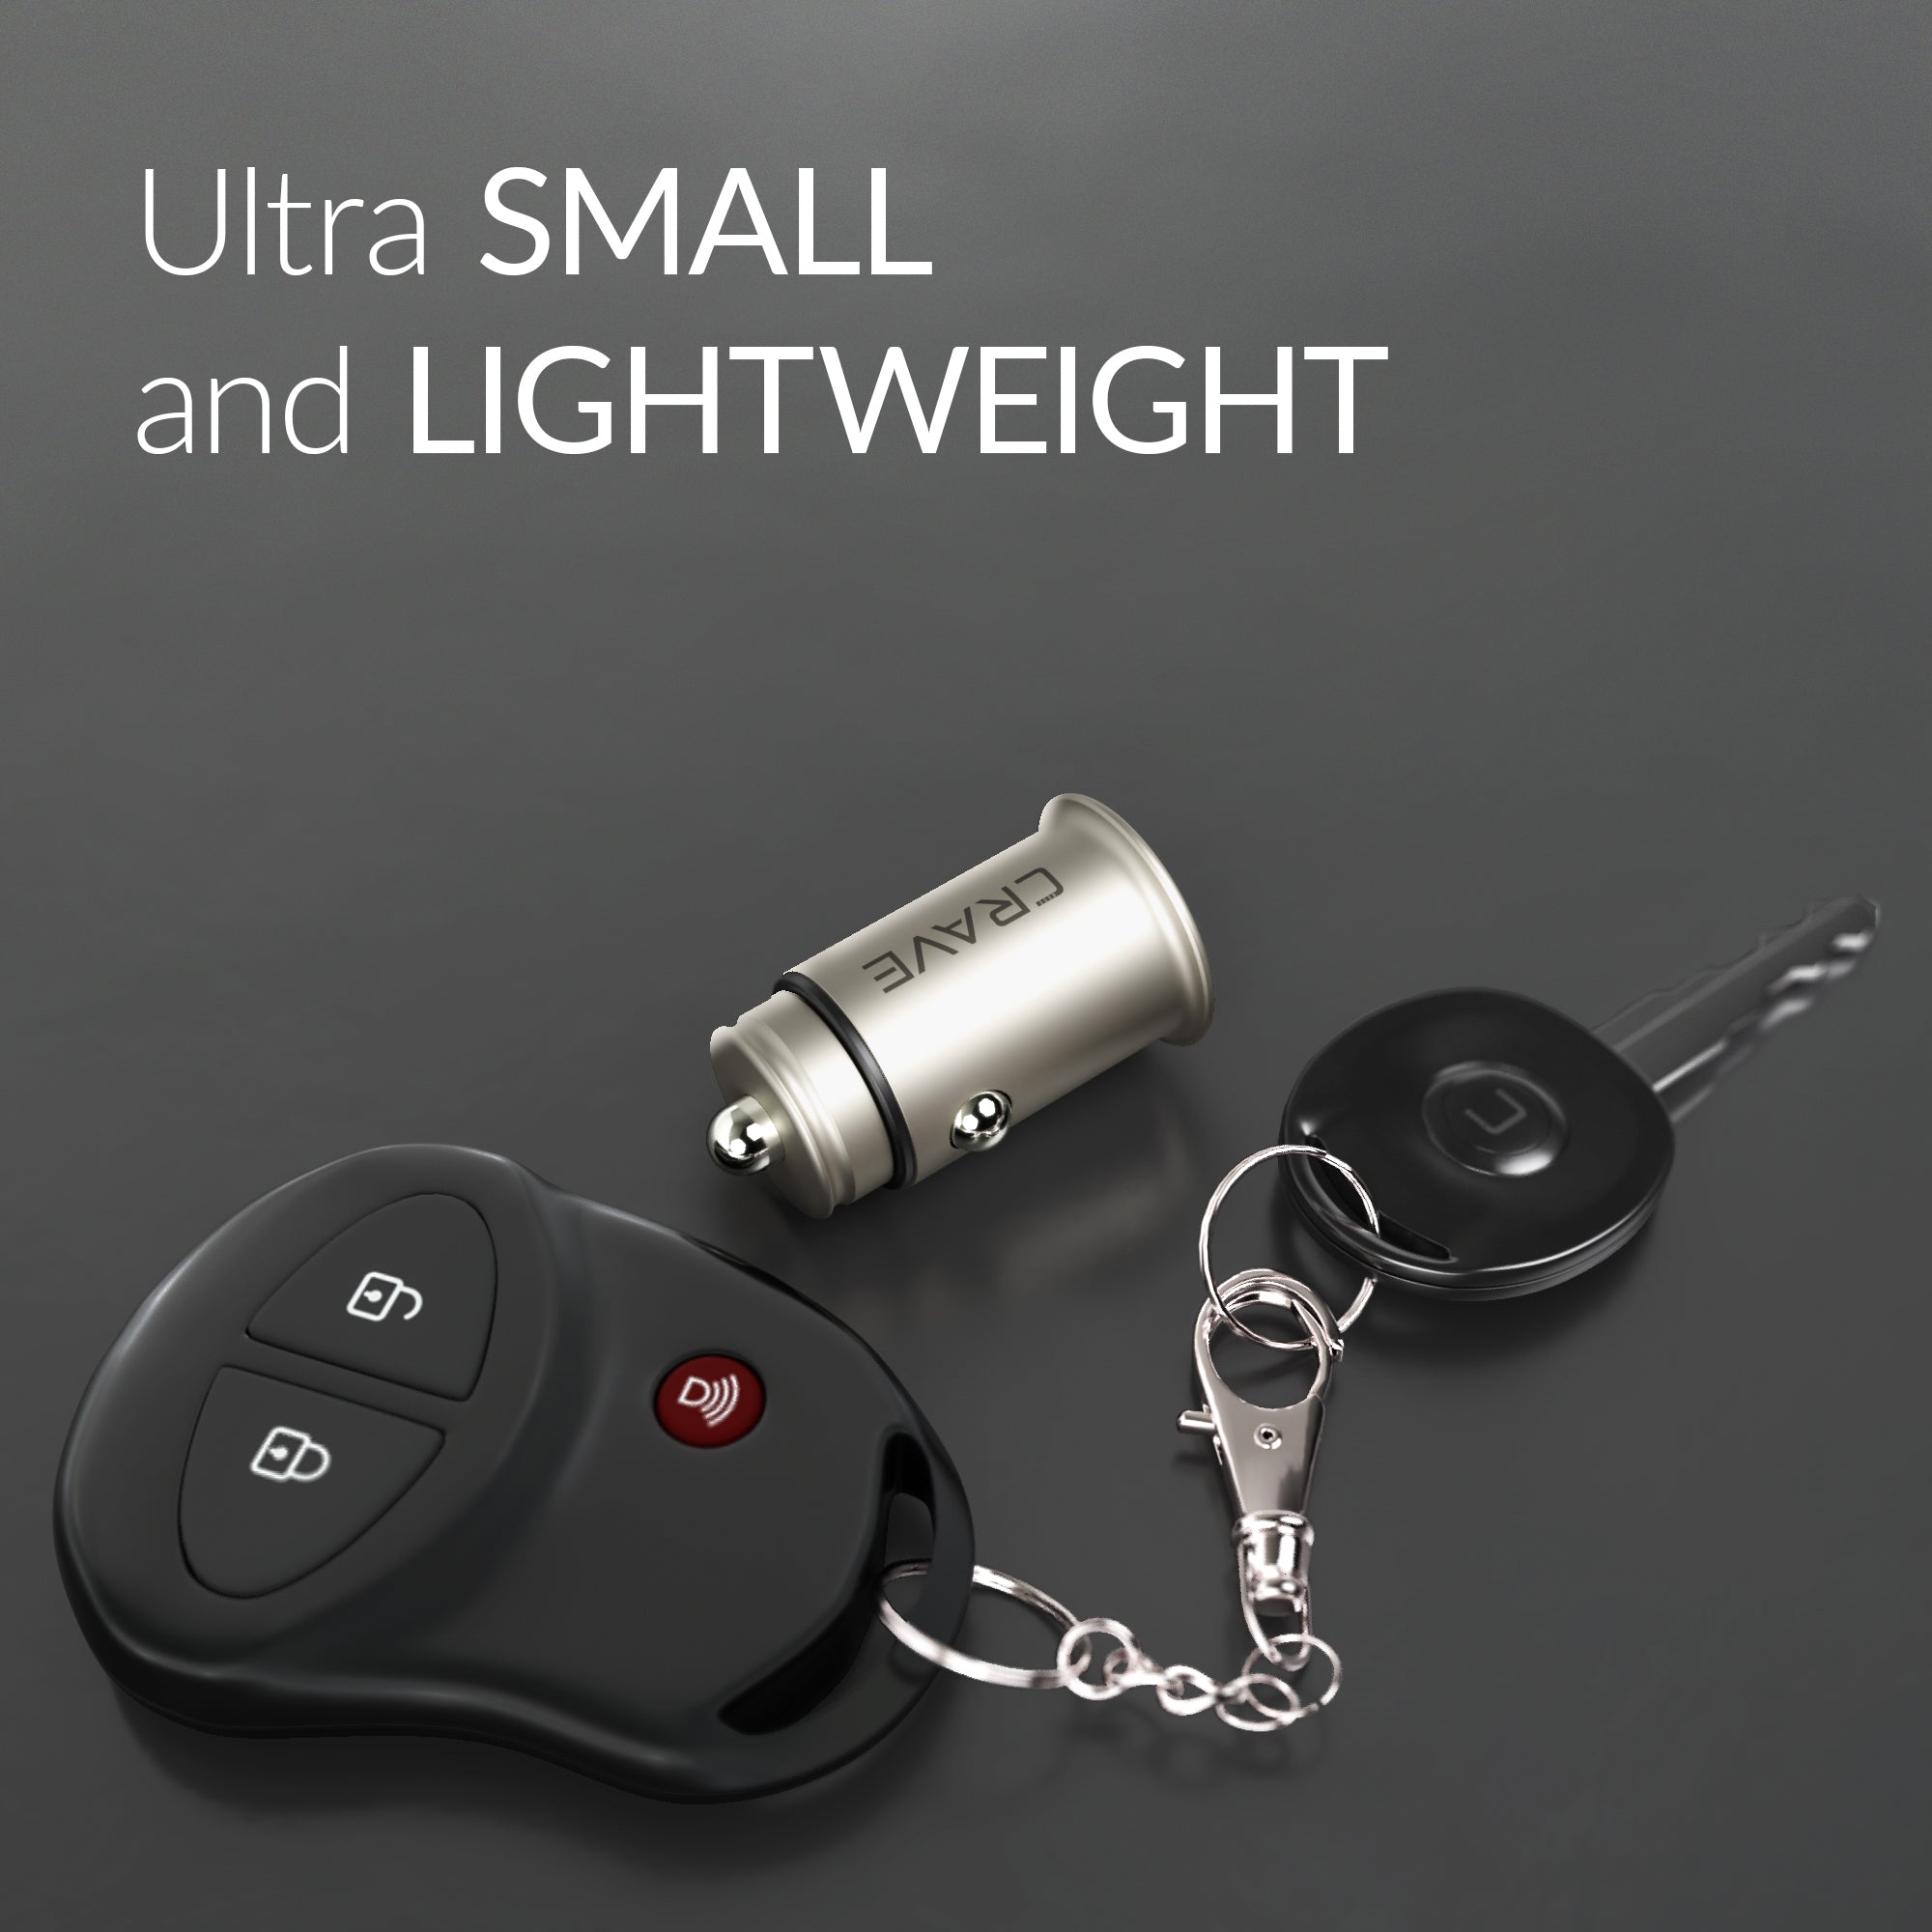 Crave Bullet Car Charger - Buy 2 Get 1 Free